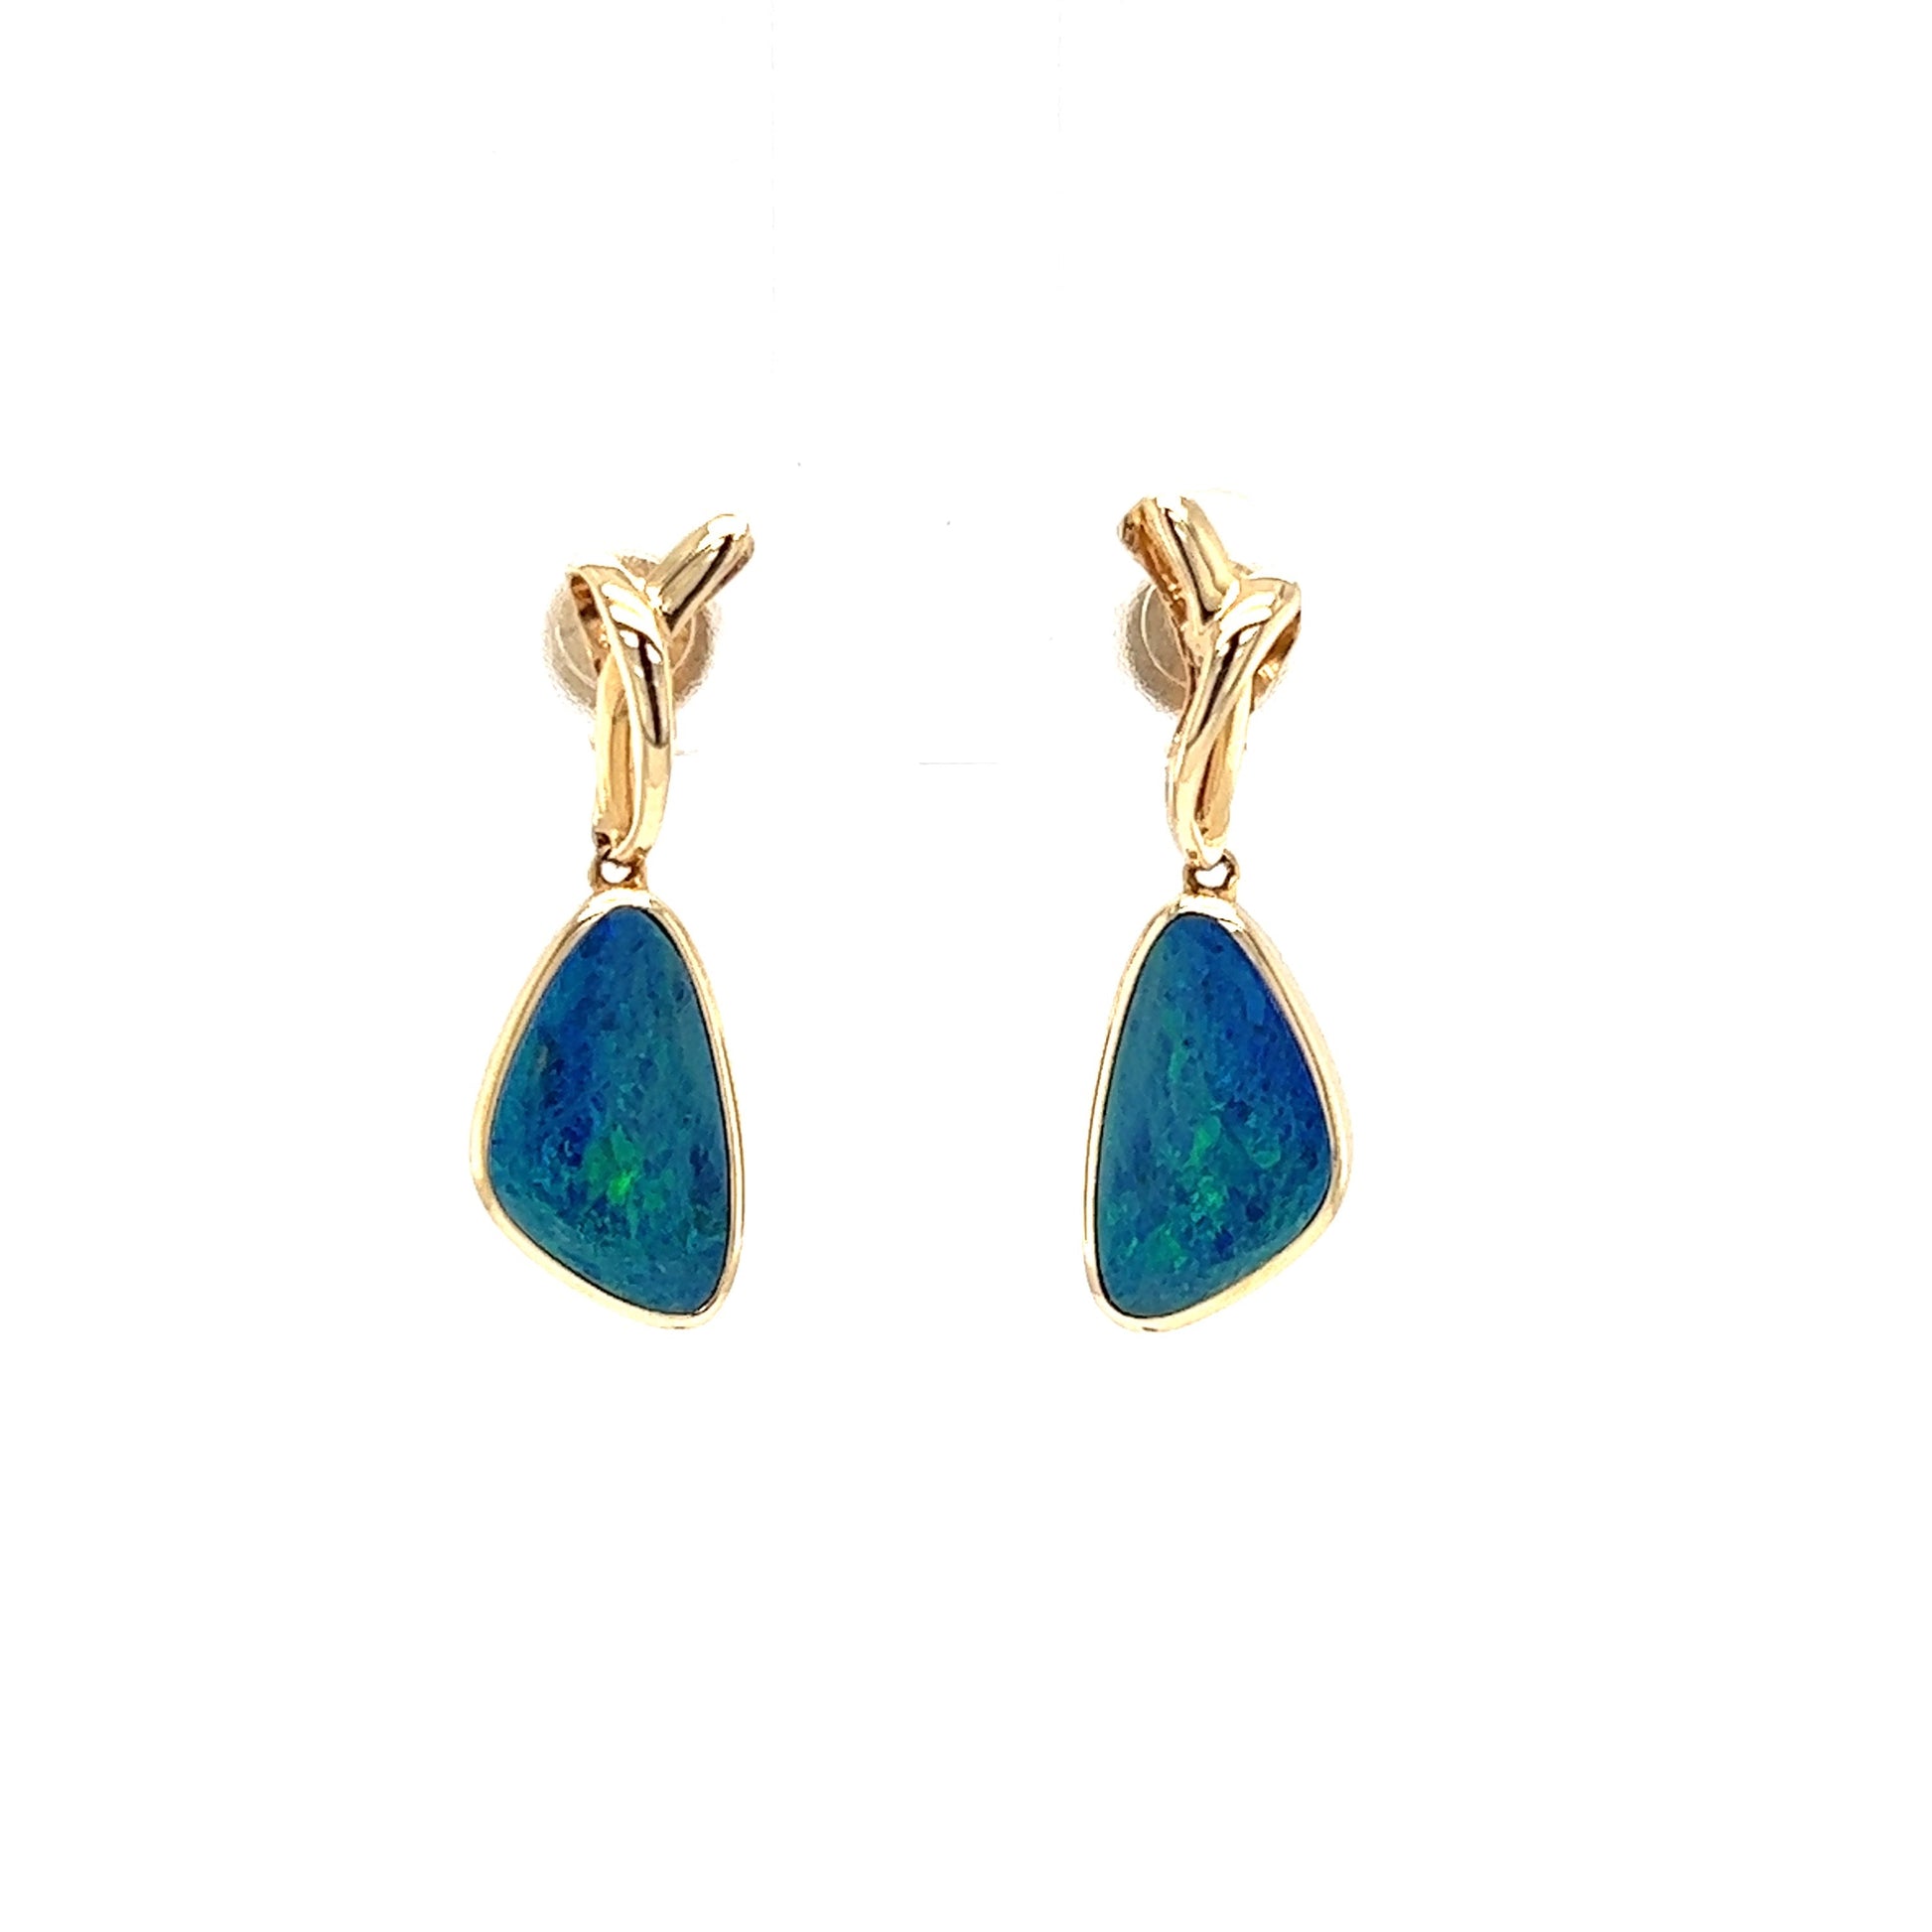 Black Opal Drop Earrings with 3.28ctw of Opal in 14K Yellow Gold Front Hanging View